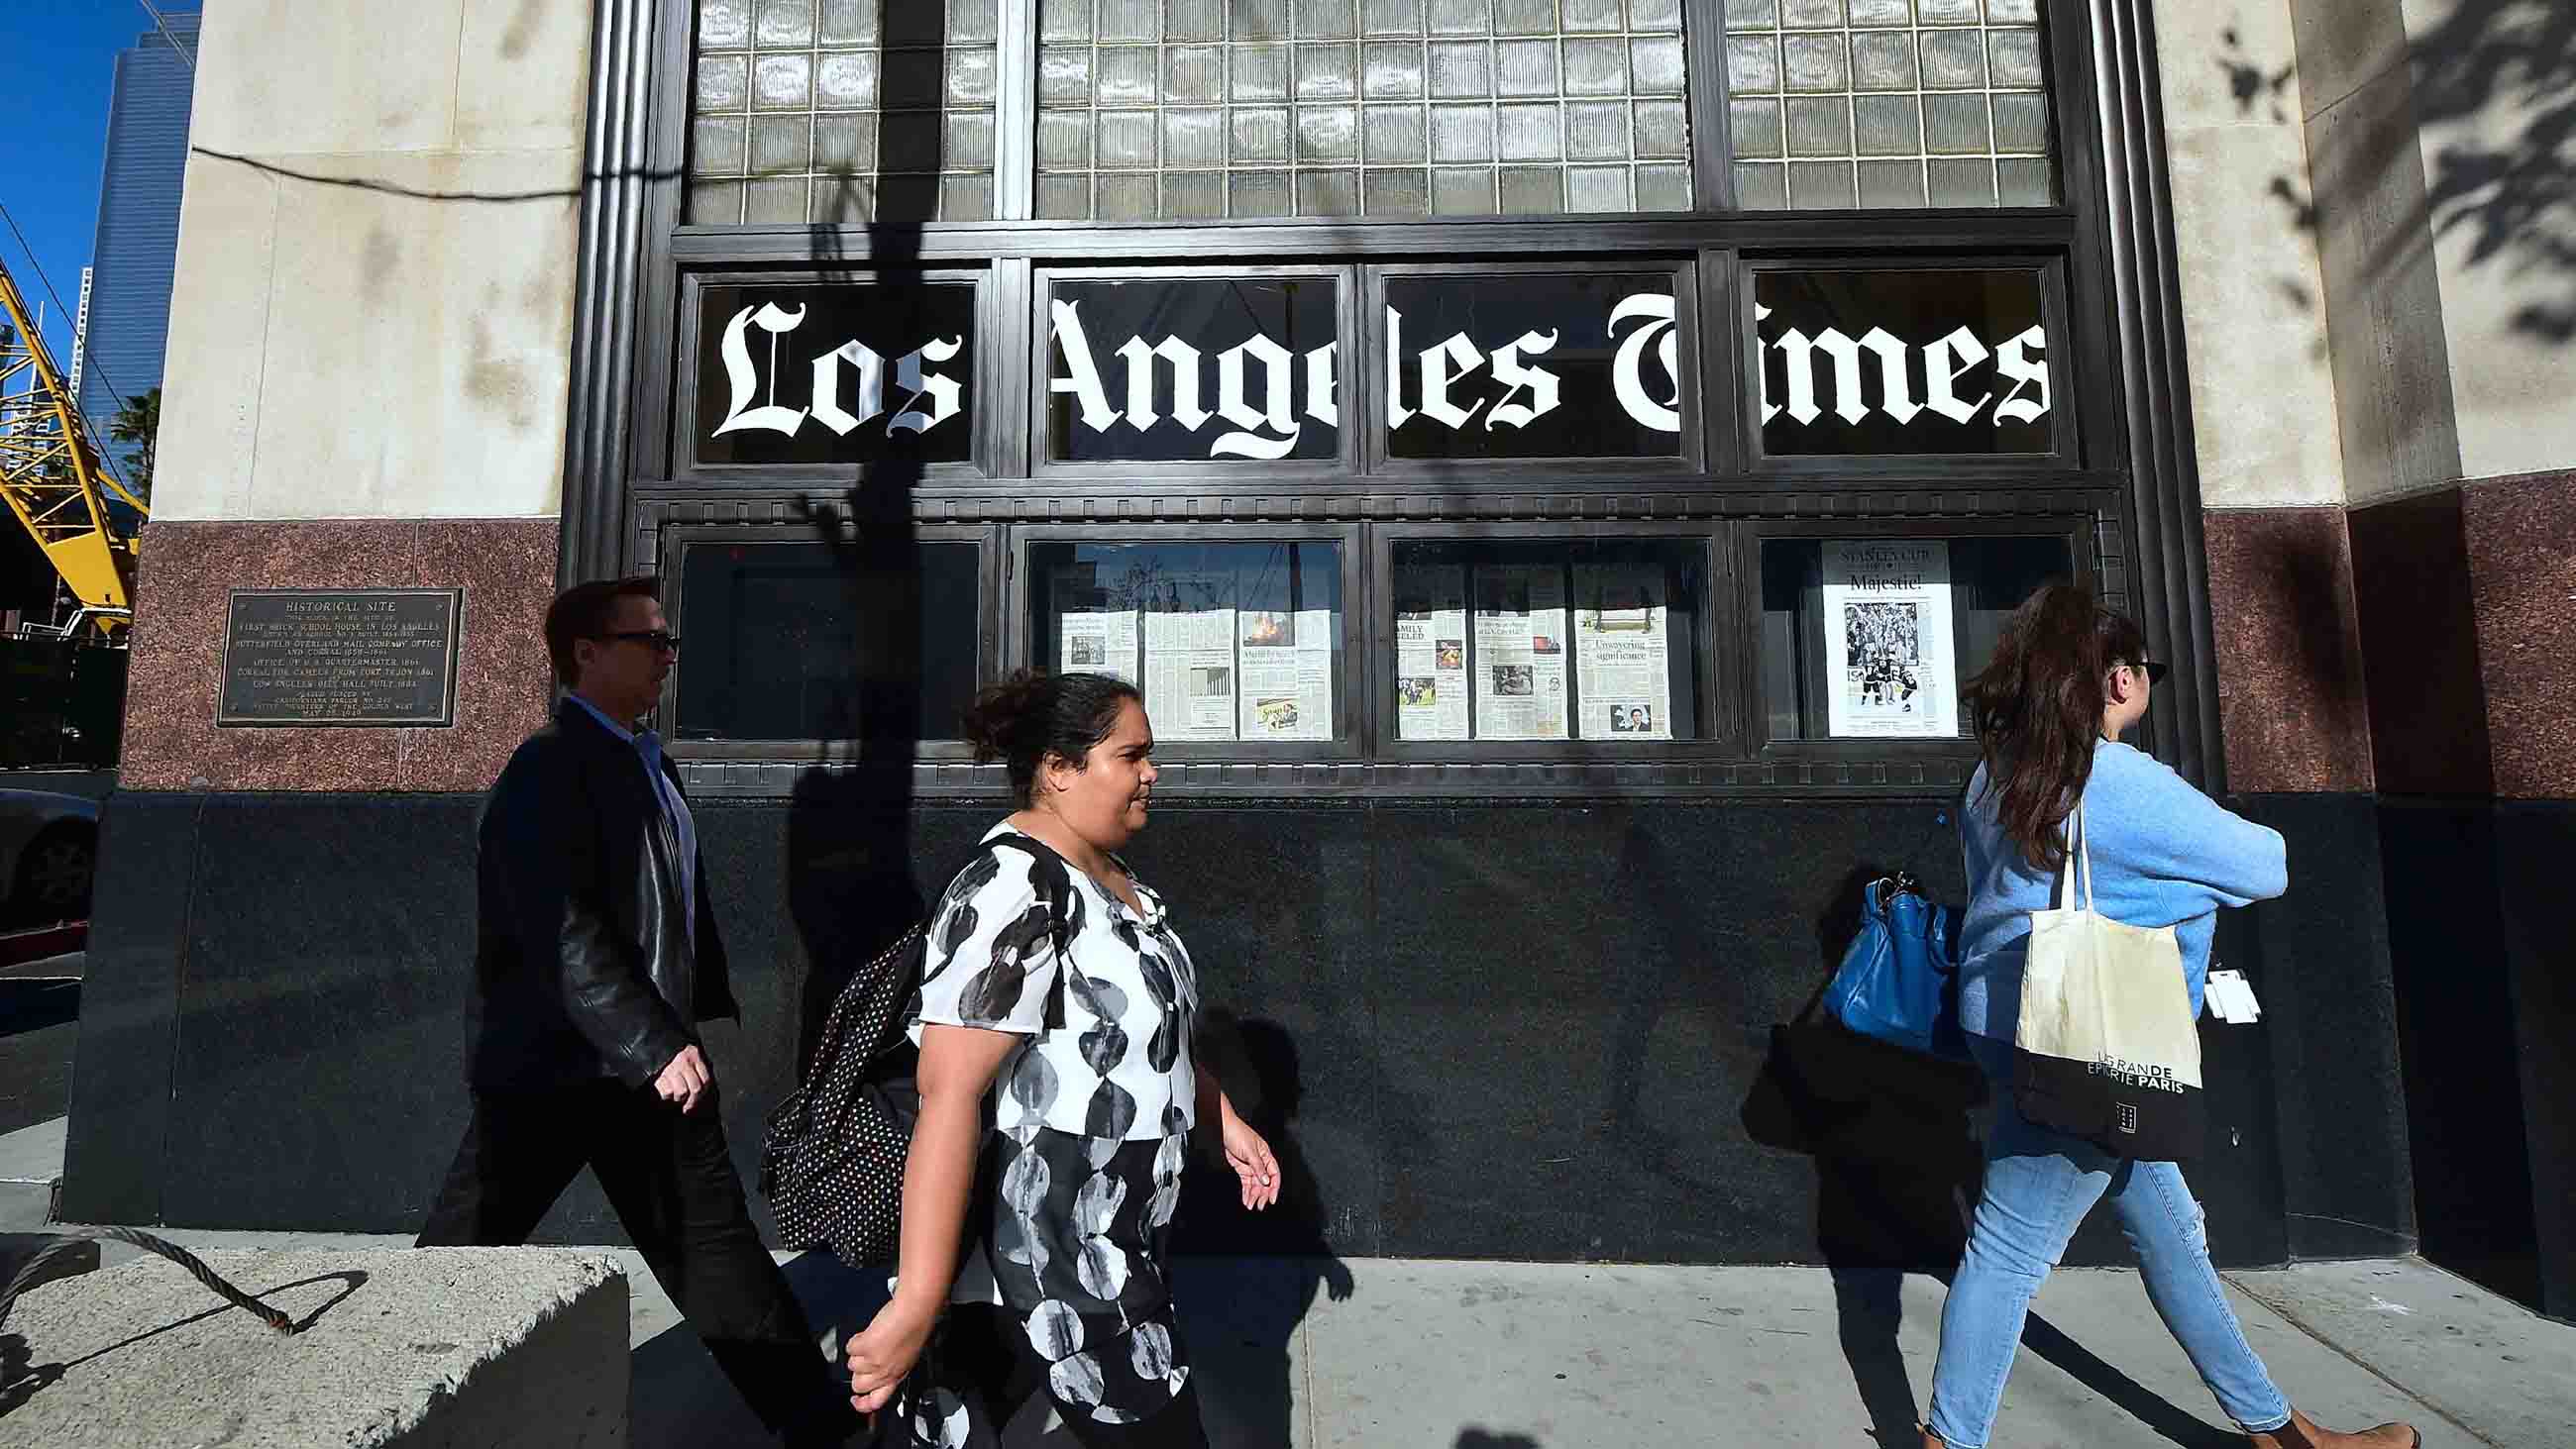 Wednesday's sale of The Los Angeles Times was largely welcomed by newsroom staff. But the paper's new billionaire owner has faced his share of controversies.